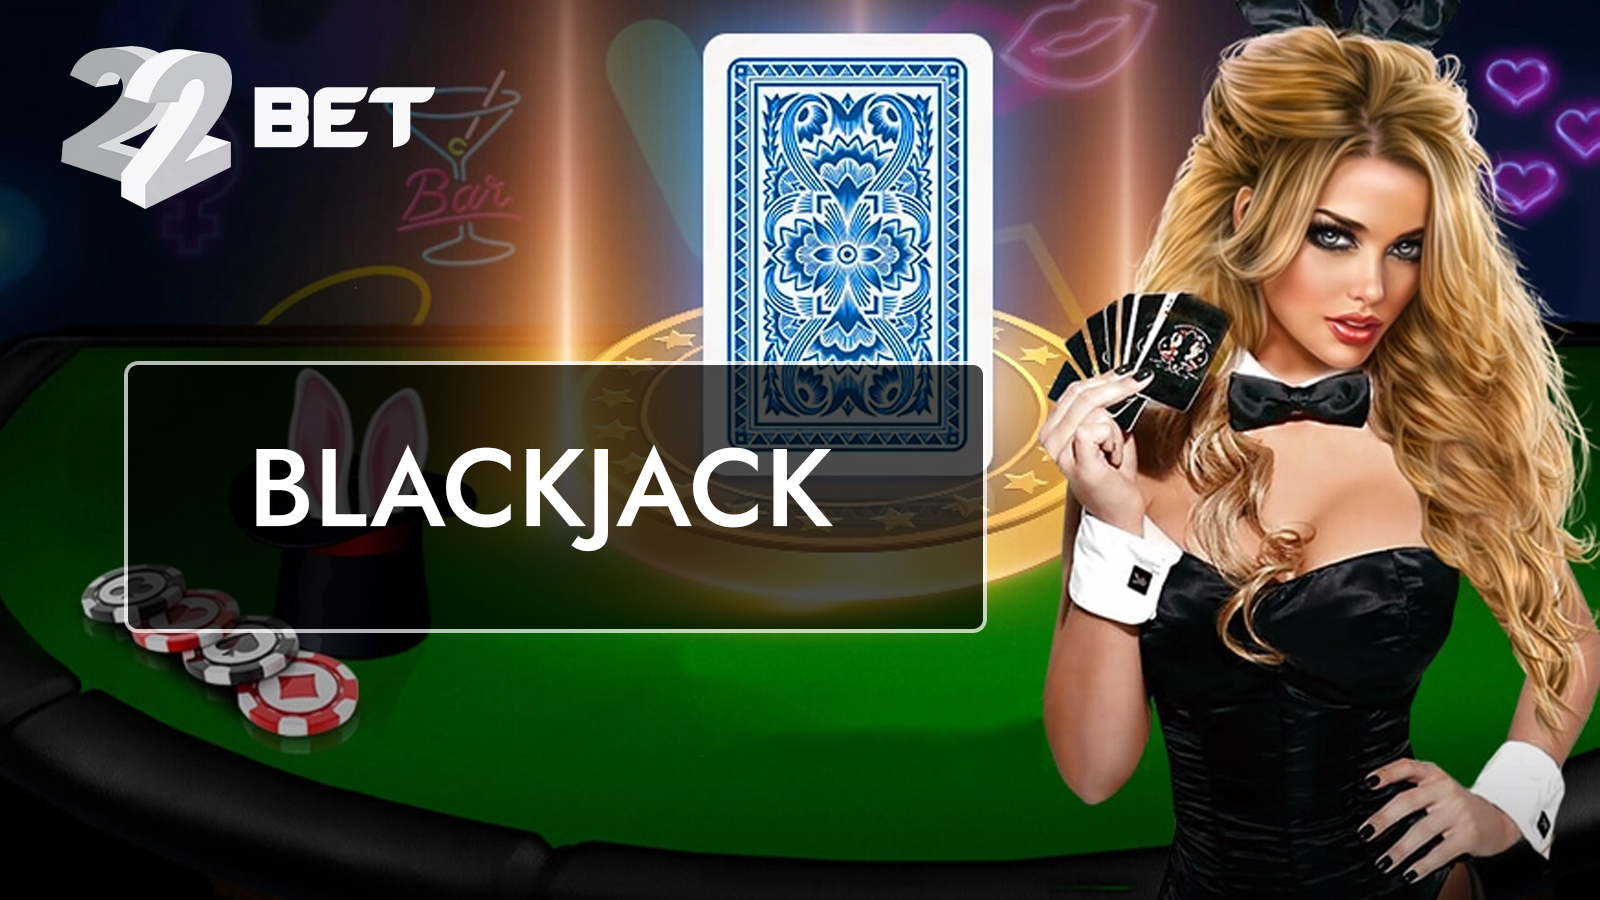 Experience blackjack games at 22bet Casino.